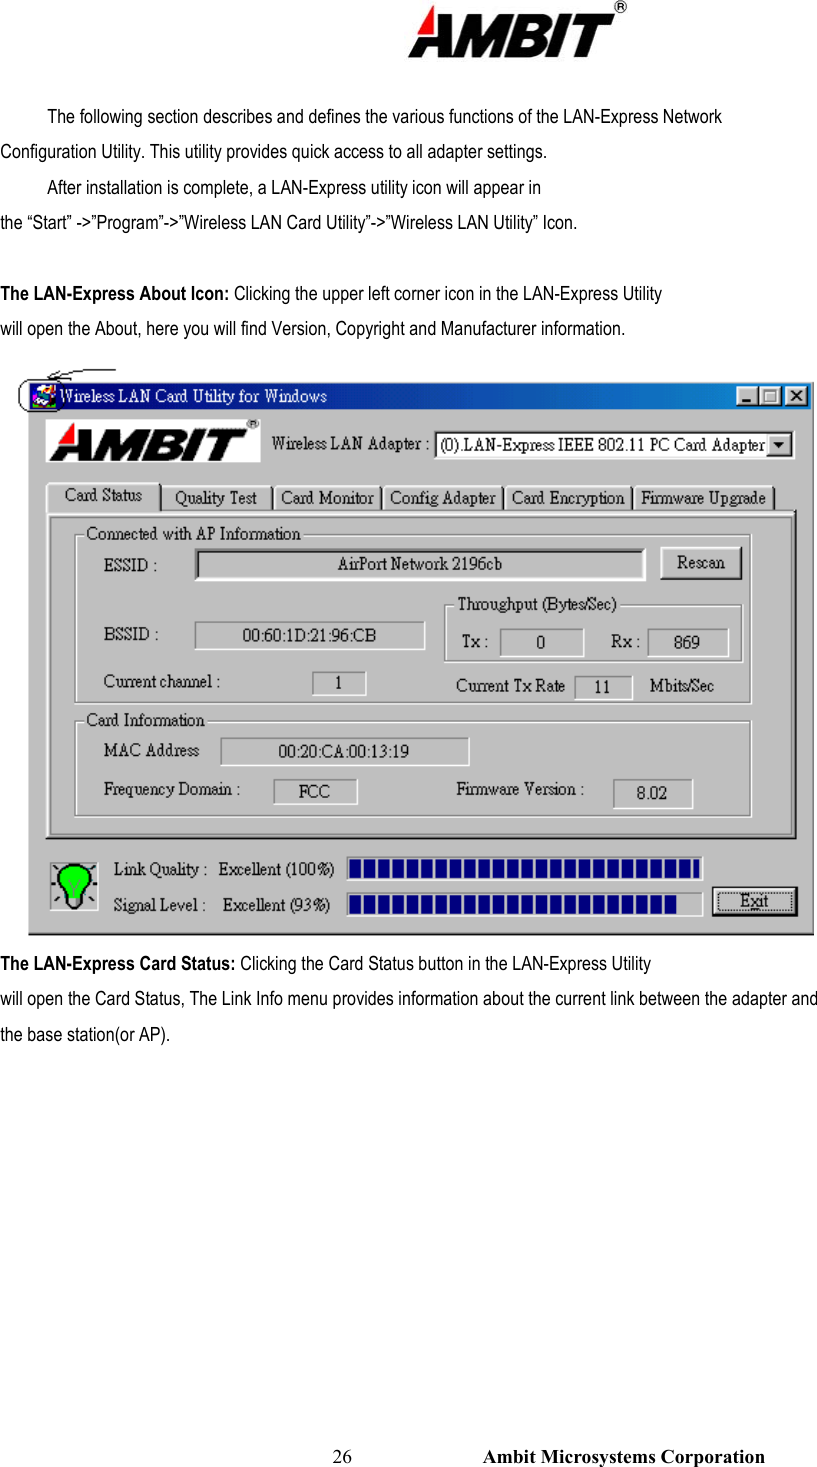                                                                                                          26                           Ambit Microsystems Corporation  The following section describes and defines the various functions of the LAN-Express Network Configuration Utility. This utility provides quick access to all adapter settings. After installation is complete, a LAN-Express utility icon will appear in the “Start” -&gt;”Program”-&gt;”Wireless LAN Card Utility”-&gt;”Wireless LAN Utility” Icon.  The LAN-Express About Icon: Clicking the upper left corner icon in the LAN-Express Utility will open the About, here you will find Version, Copyright and Manufacturer information.  The LAN-Express Card Status: Clicking the Card Status button in the LAN-Express Utility will open the Card Status, The Link Info menu provides information about the current link between the adapter and the base station(or AP).  